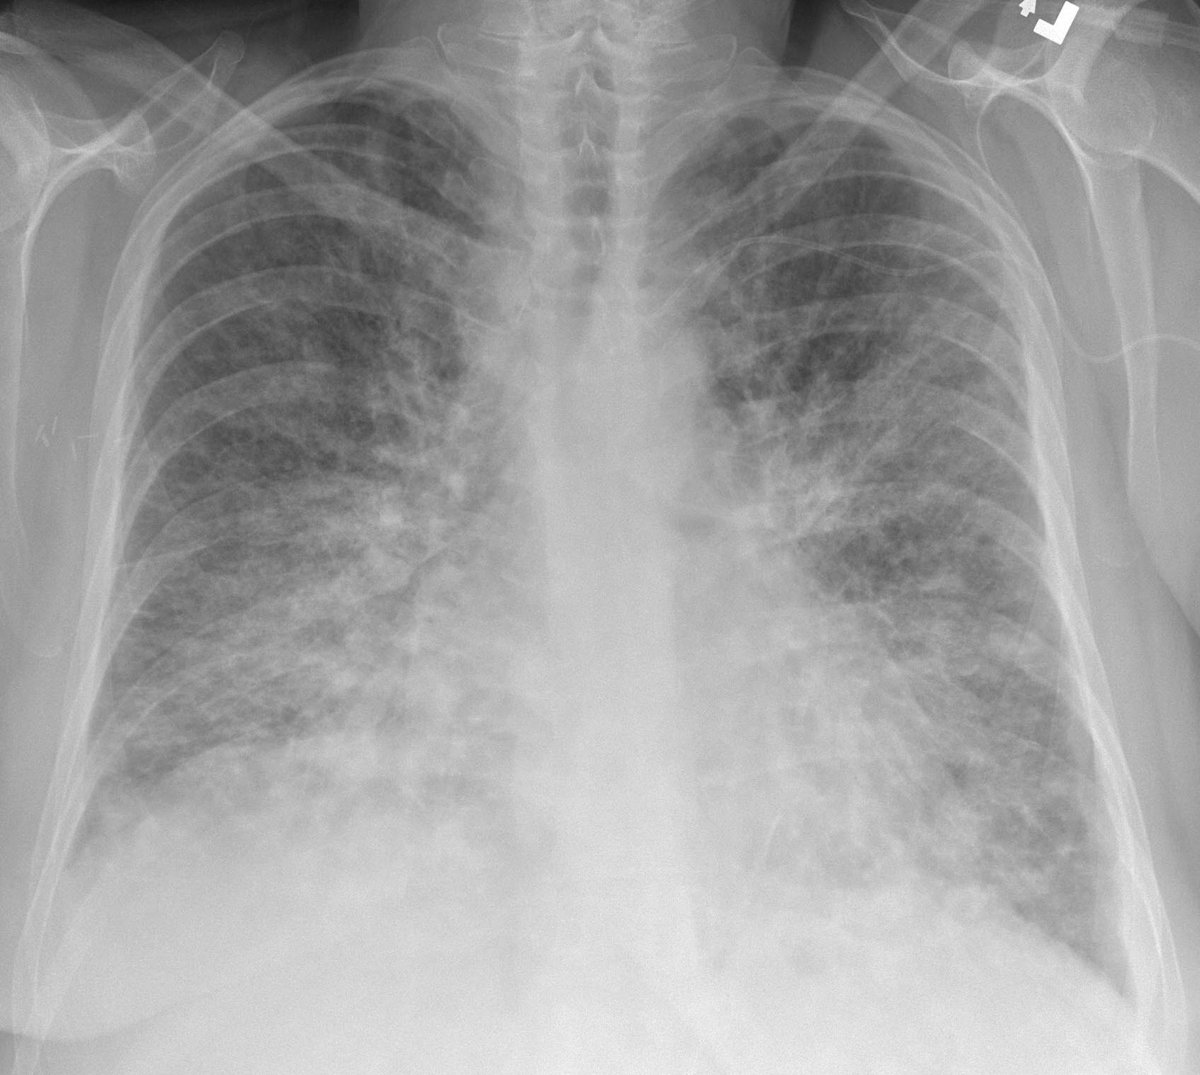 can you see emphysema on a chest x ray